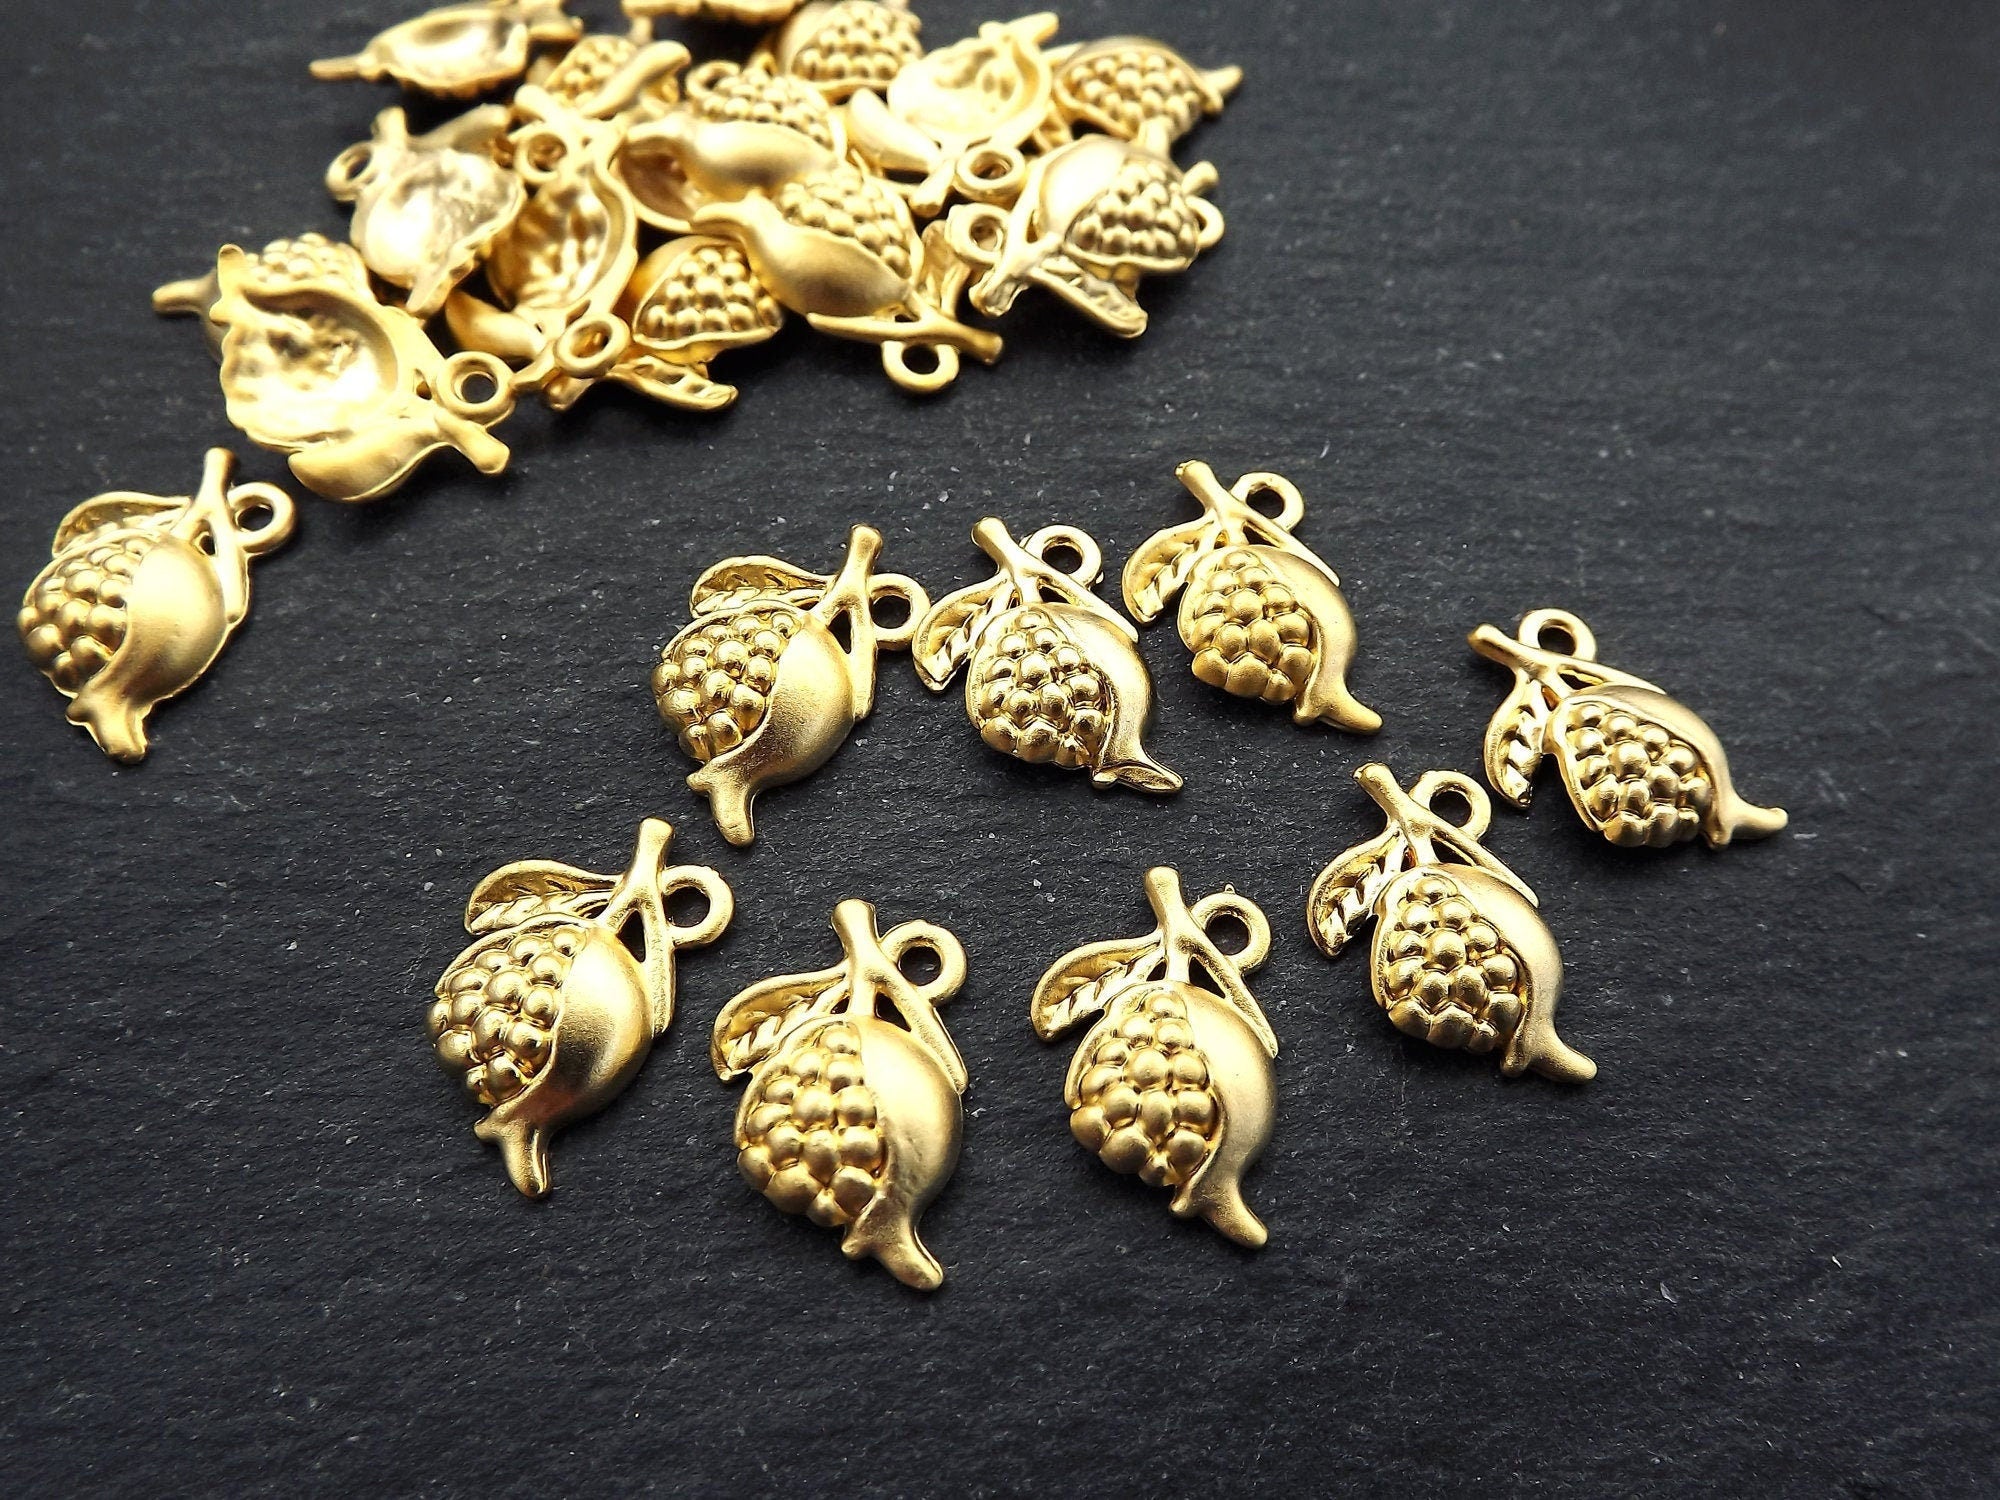 8 Pomegranate Charms, Gold Pomegranate Pendant charm, Earrings Charms, –  LylaSupplies